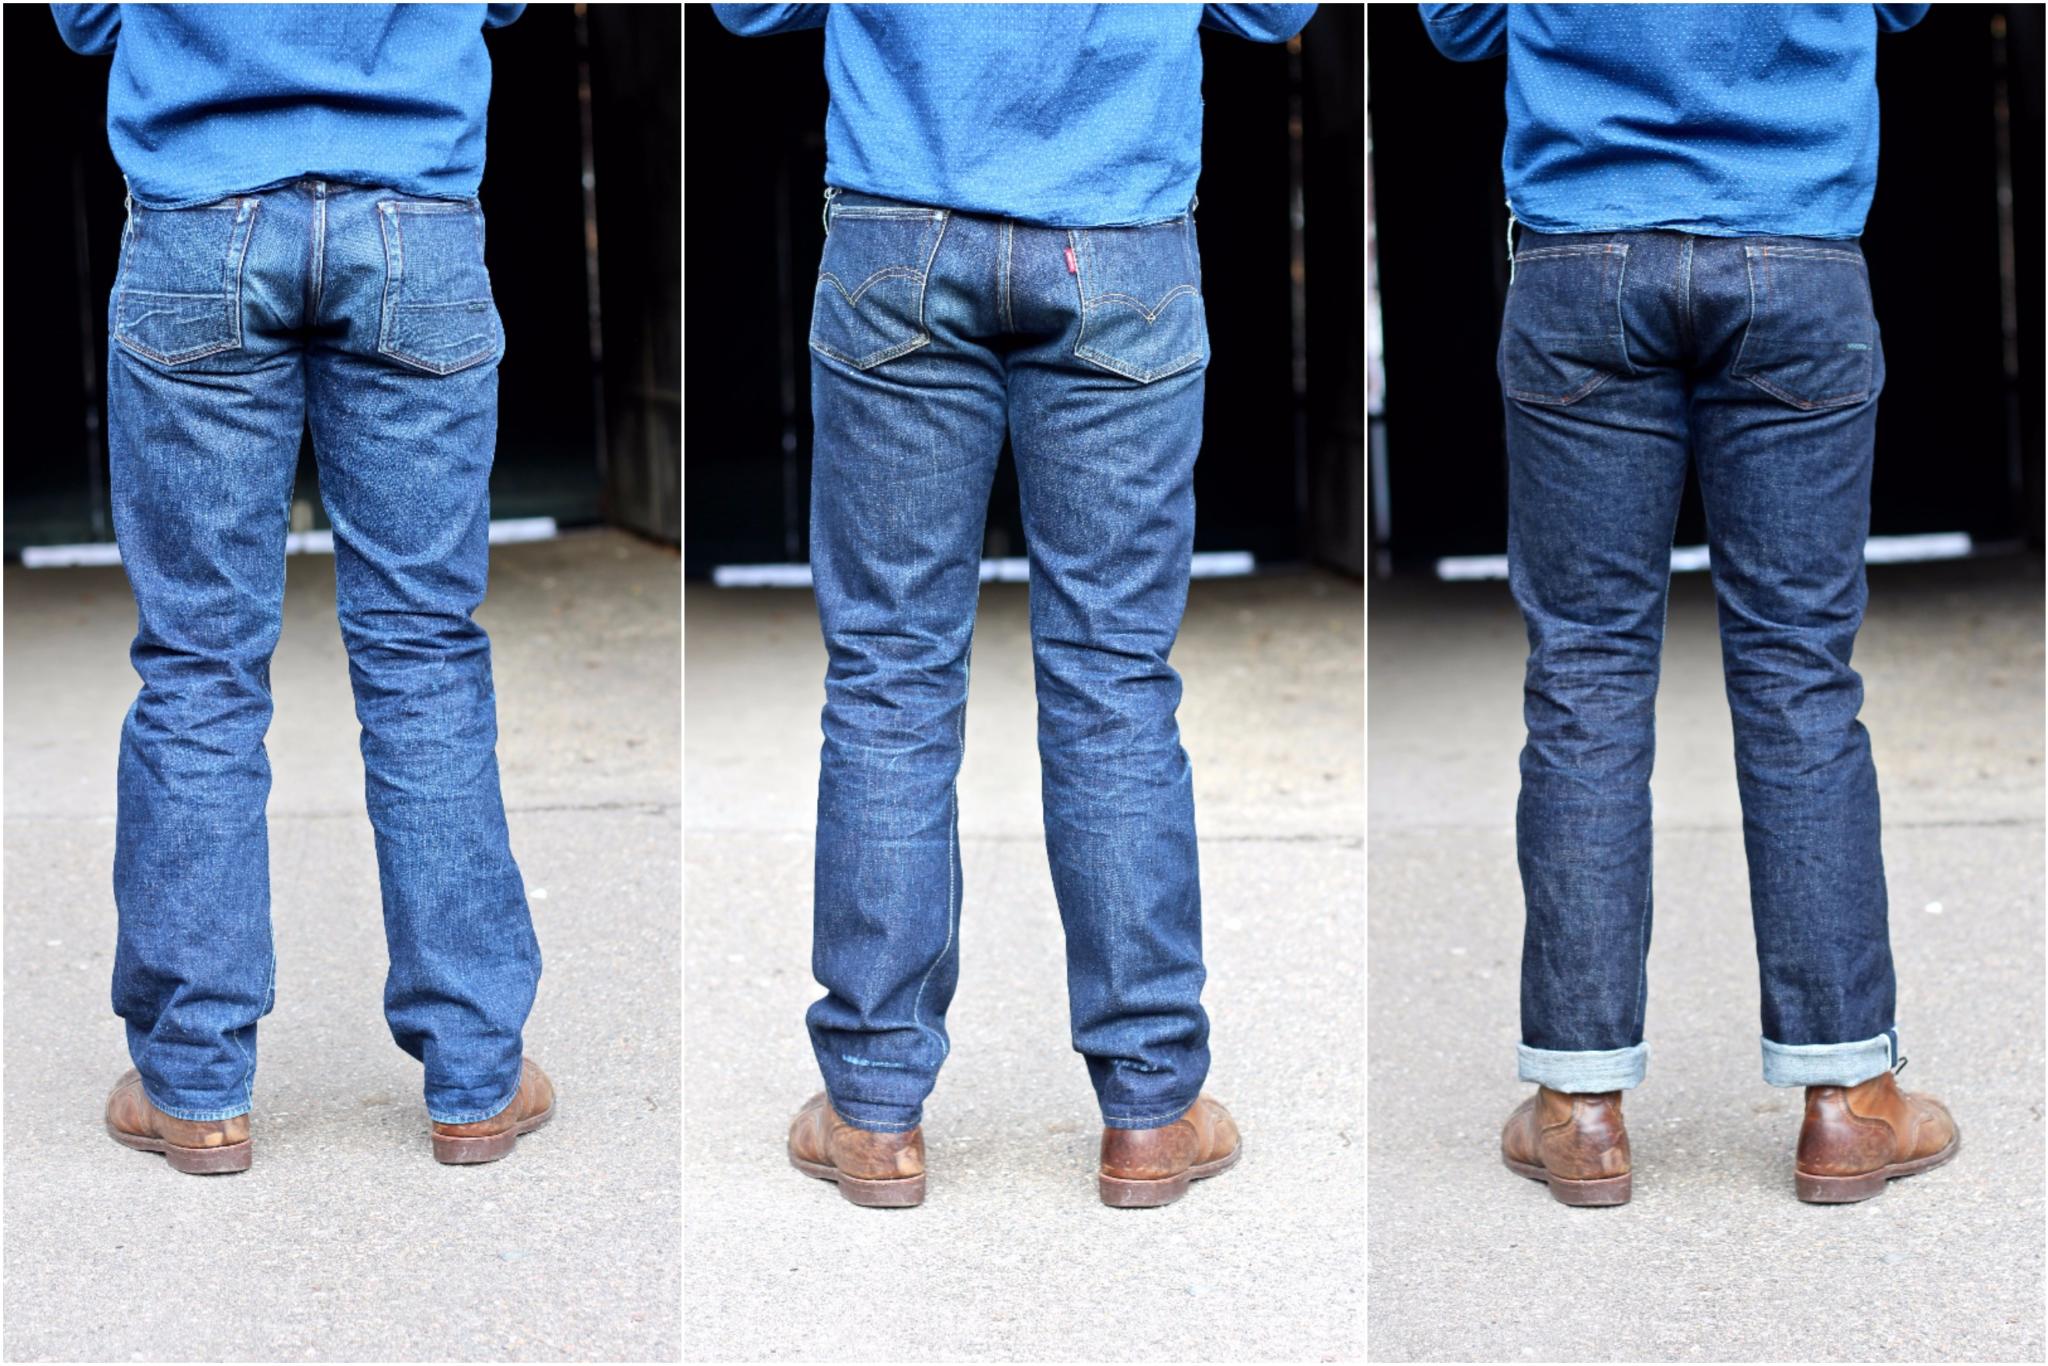 The Durable and Practical Defining Features of Jeans